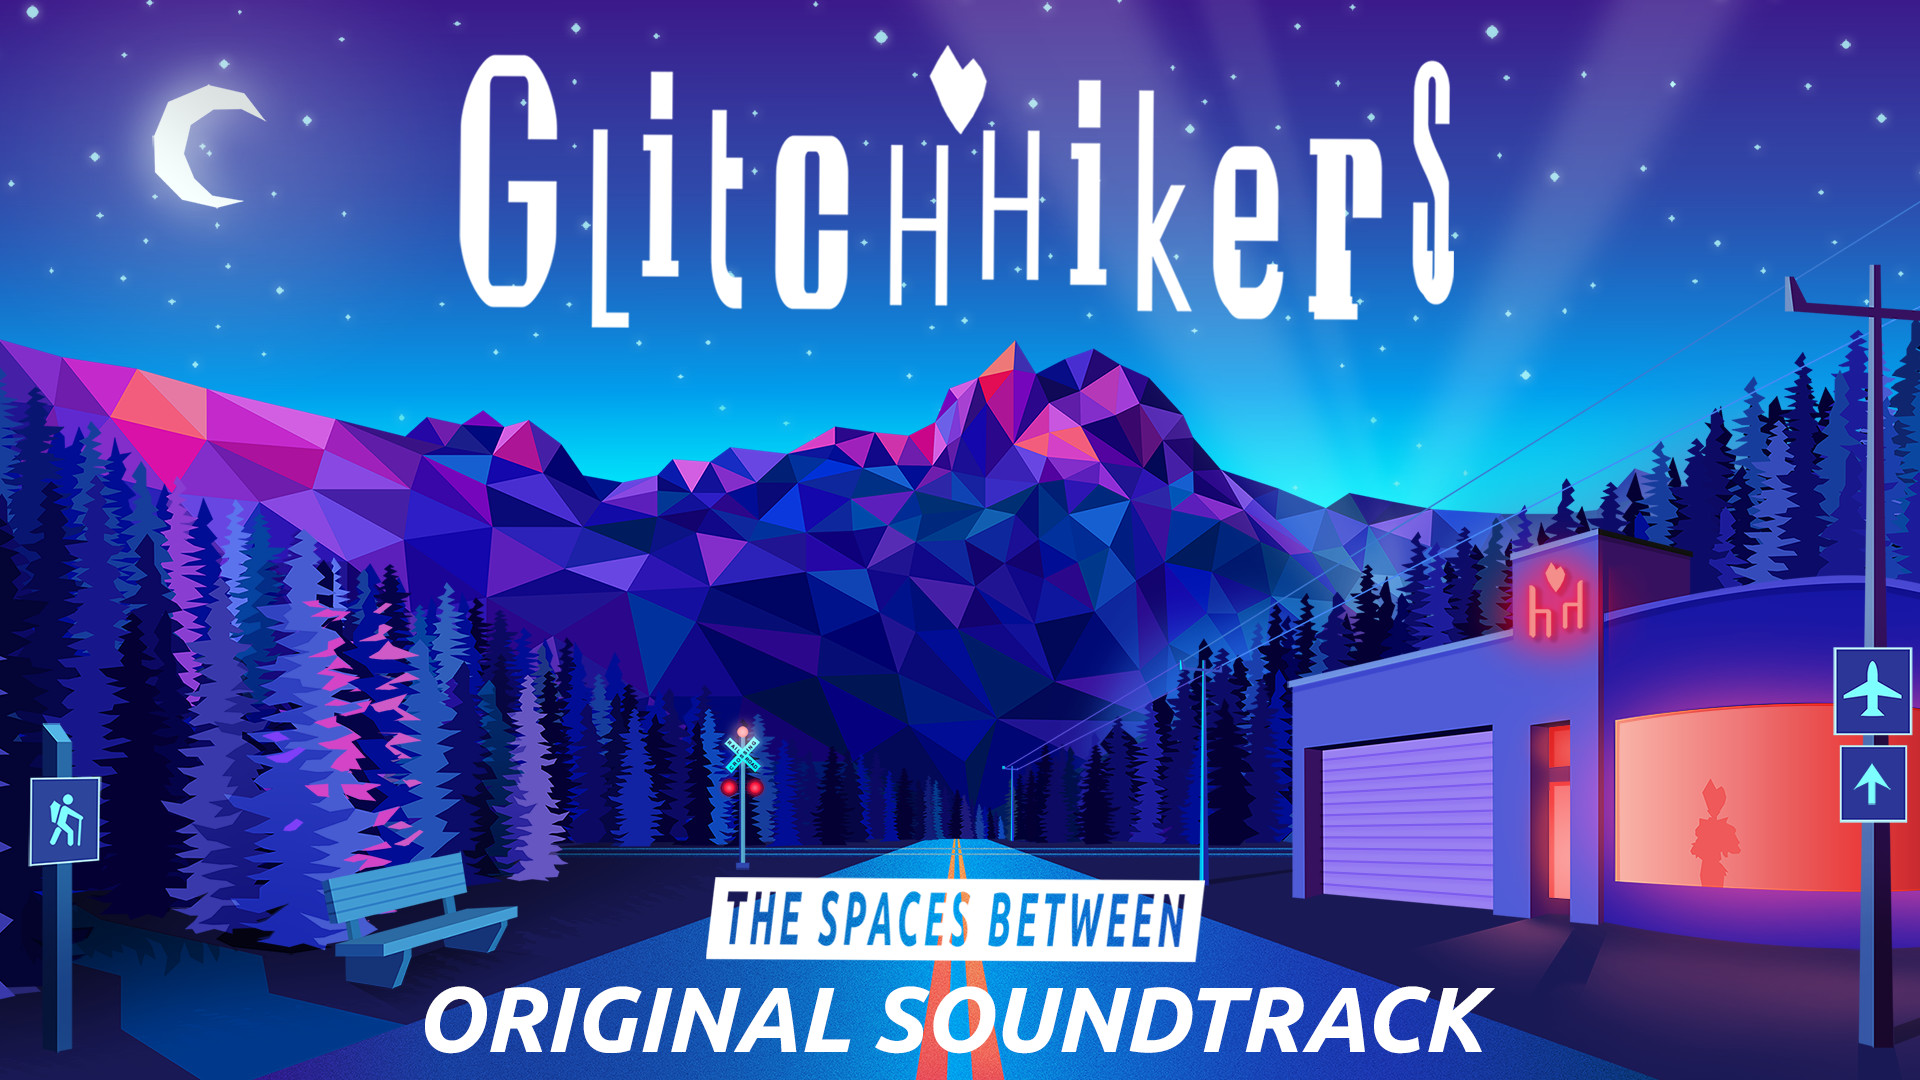 Glitchhikers: The Spaces Between Original Soundtrack Featured Screenshot #1